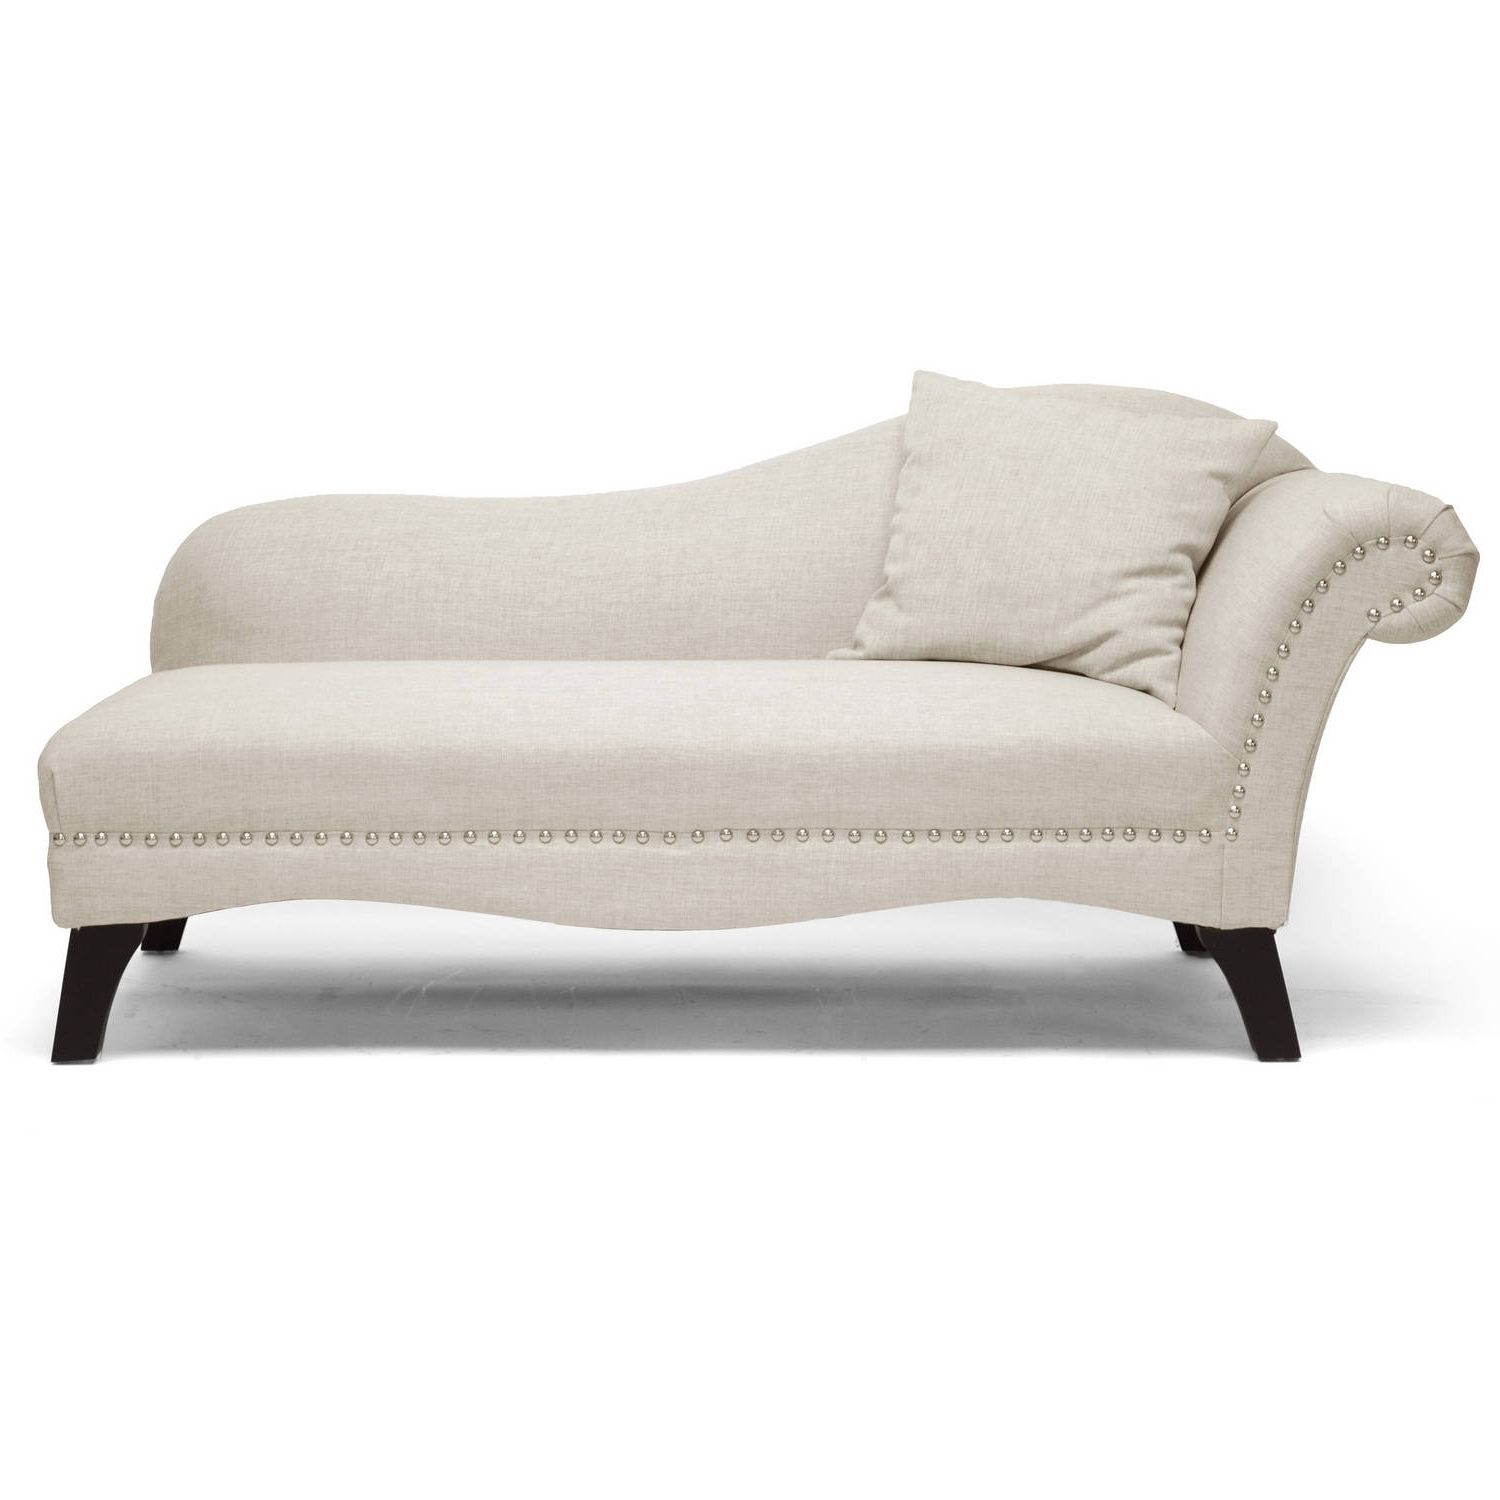 Well Known Chaise Lounges – Walmart Within Mini Chaise Lounge Chairs (View 9 of 15)